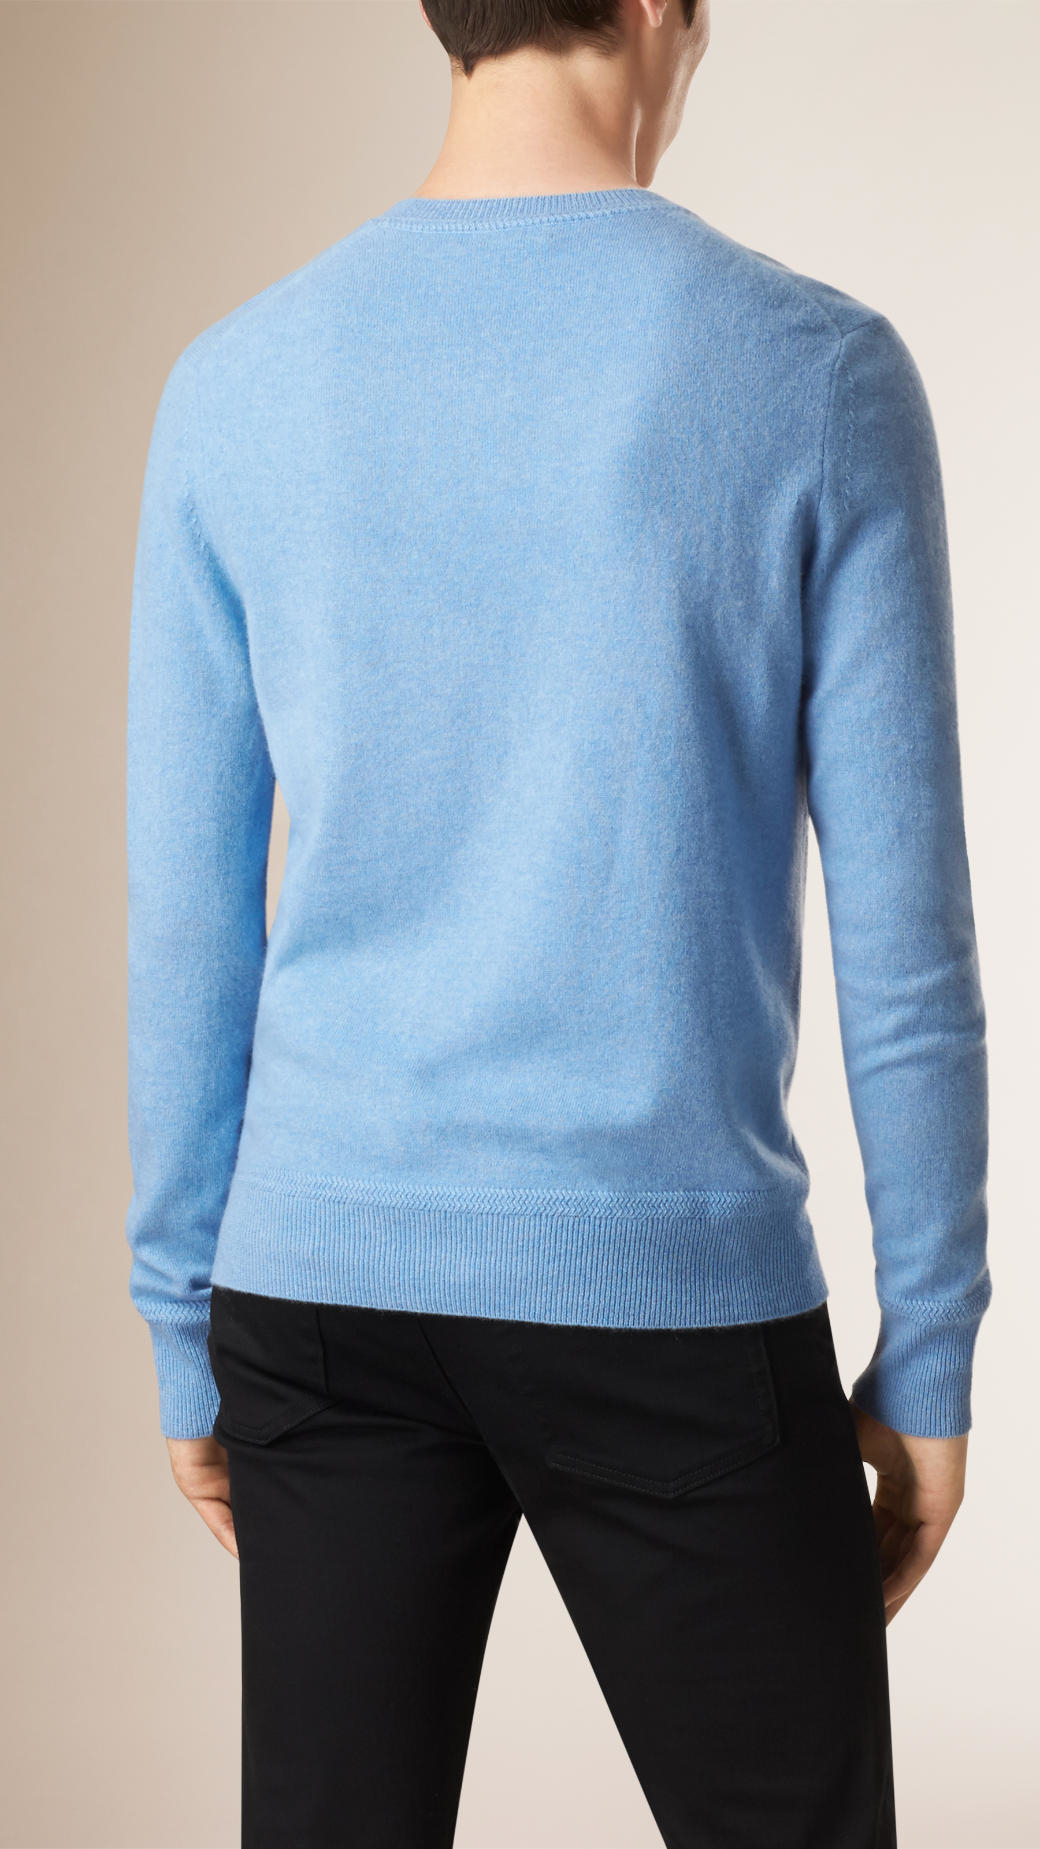 Lyst - Burberry Crew Neck Cashmere Sweater Light Blue in Blue for Men